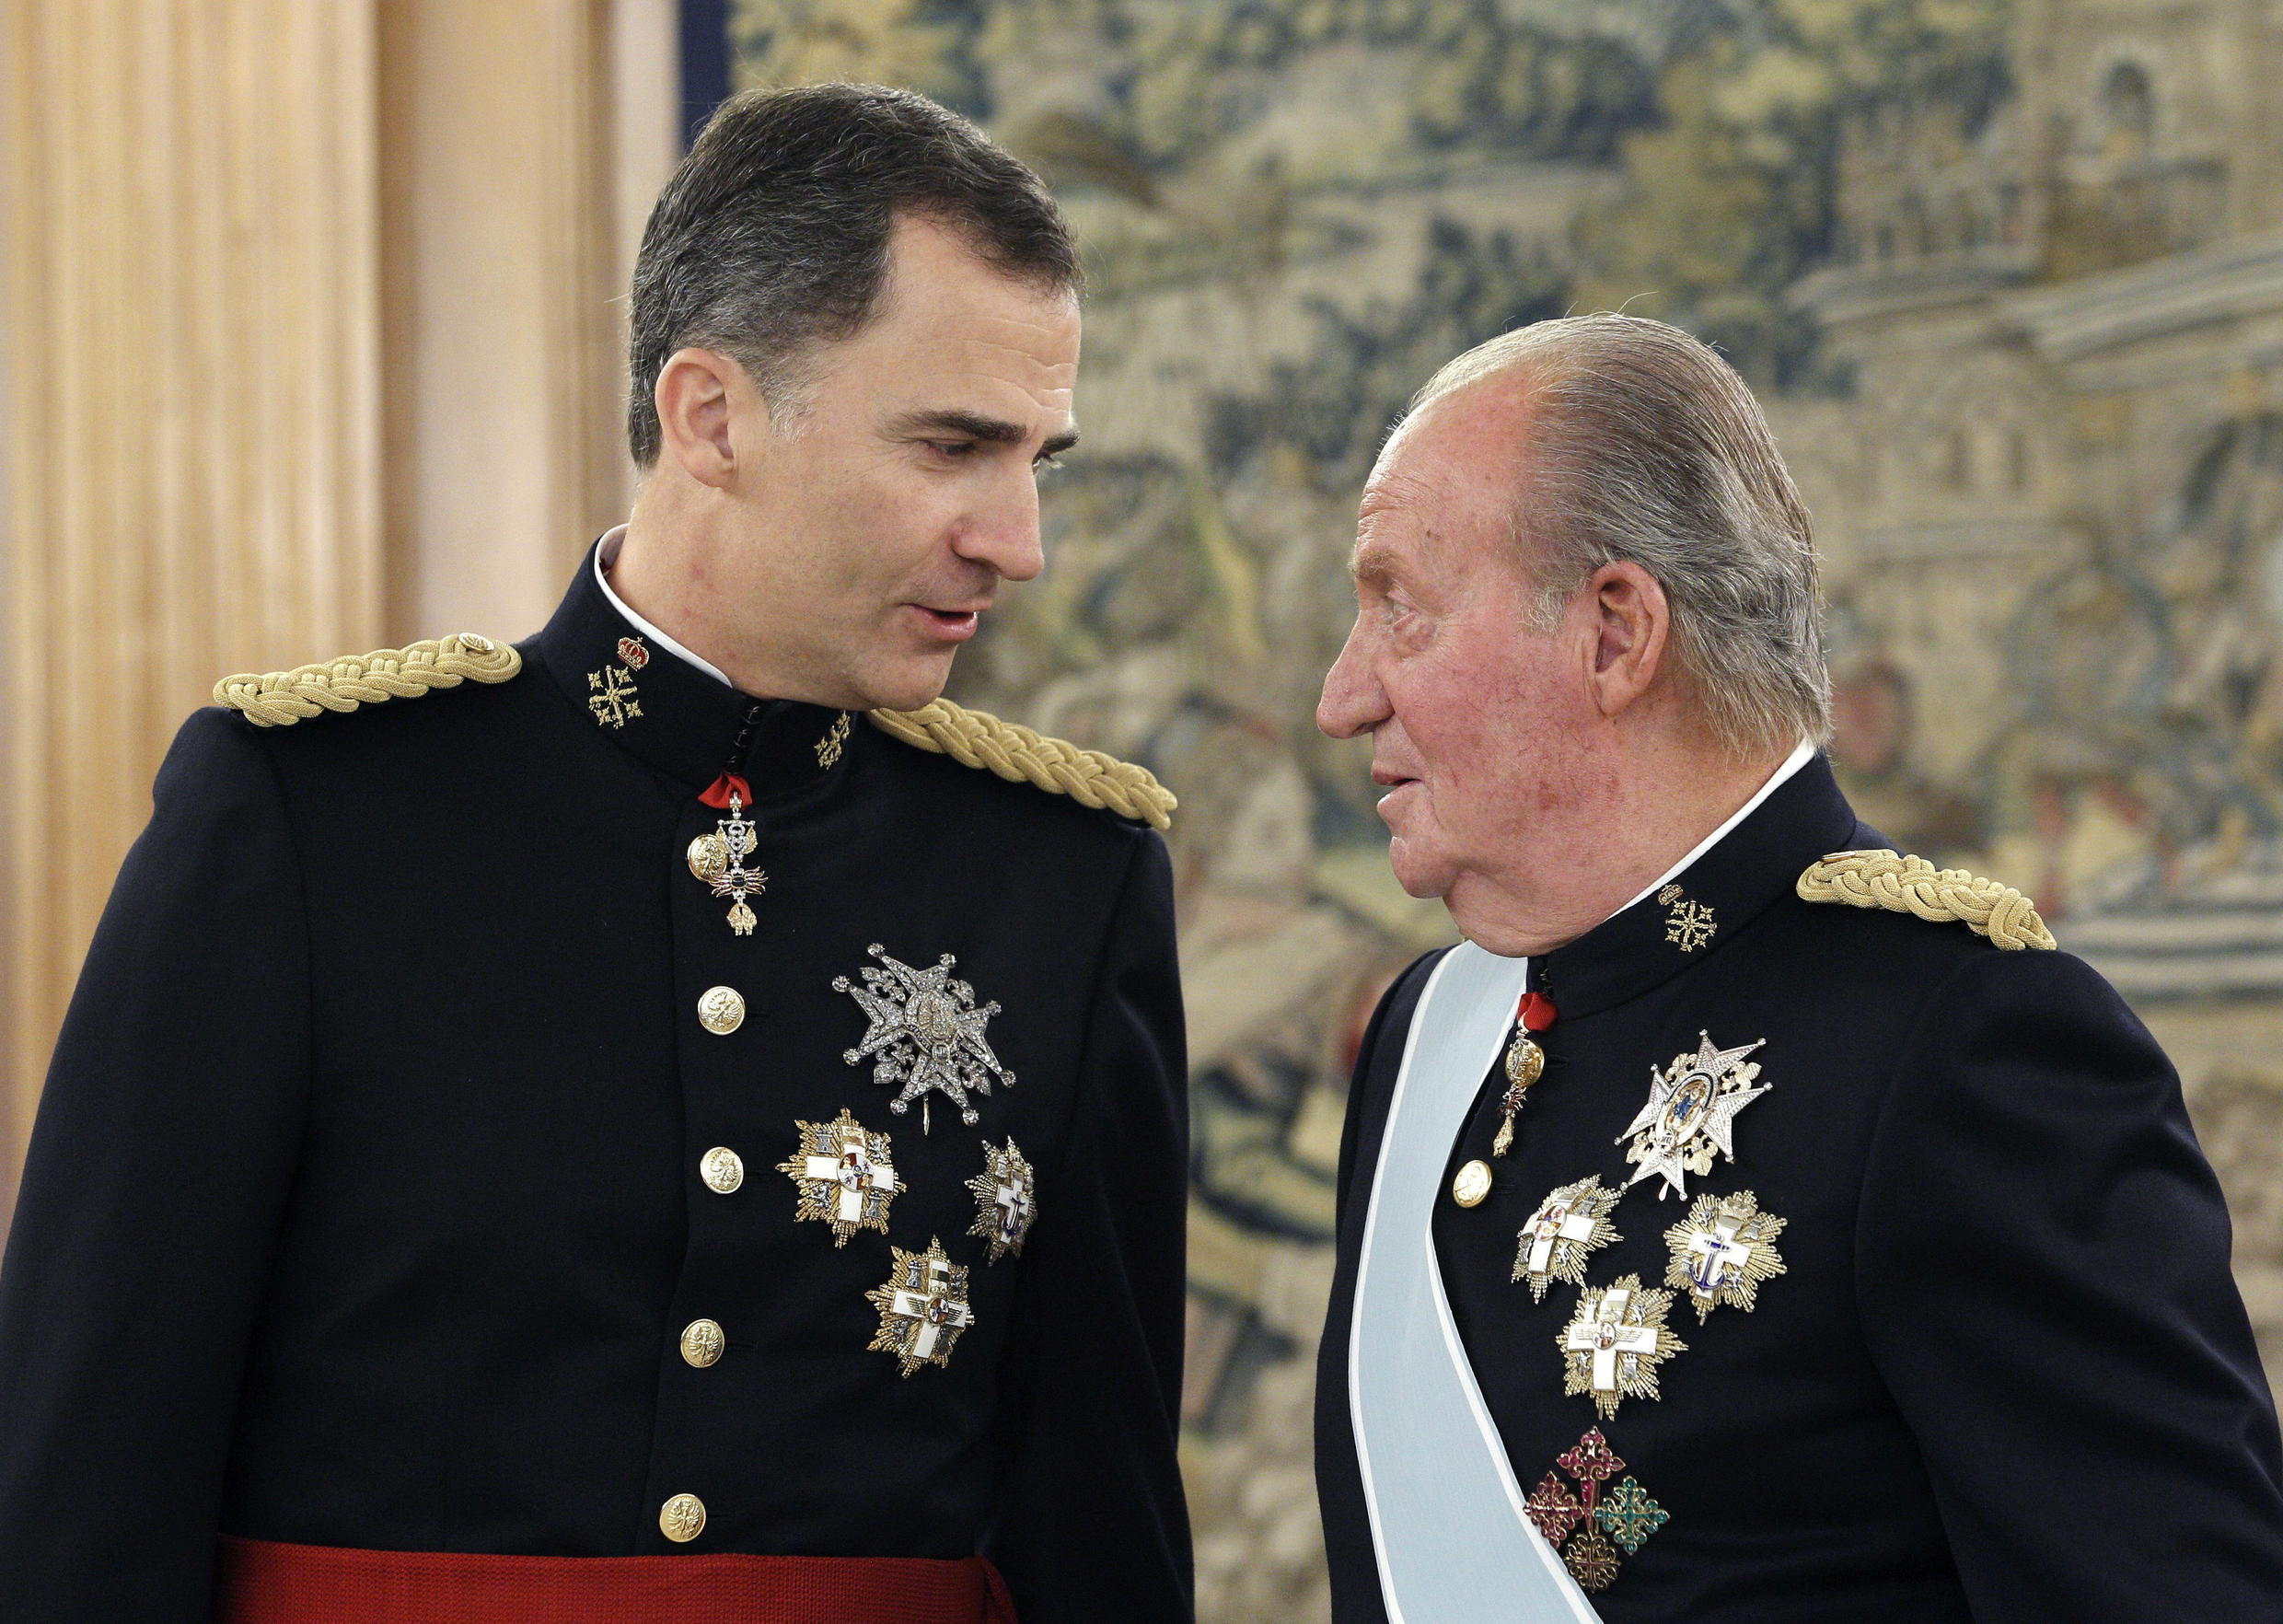 Spain’s Juan Carlos: Once popular former king goes into exile amid scandal